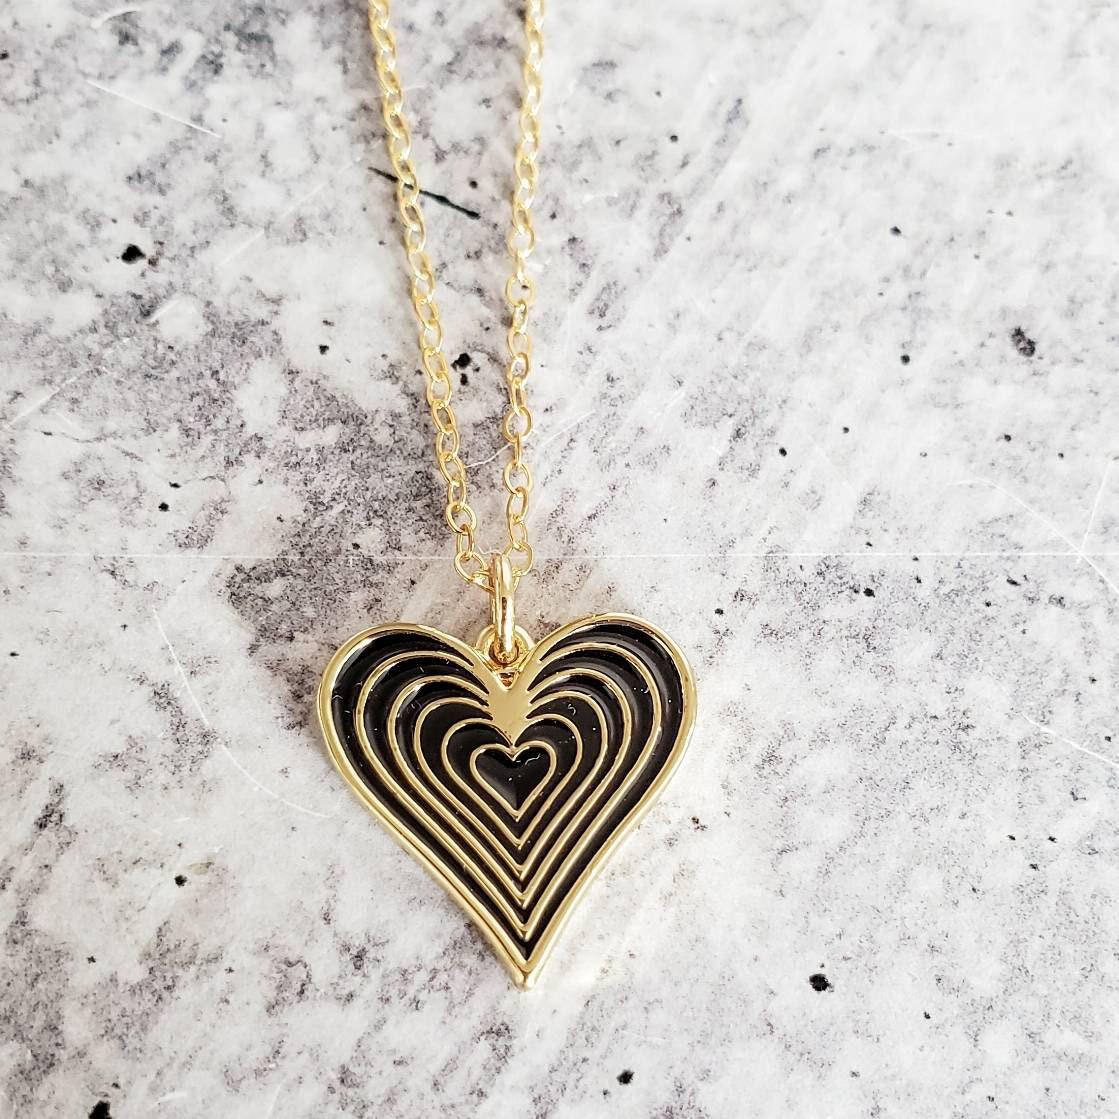 Gold Enamel Heart Necklace by Salt and Sparkle